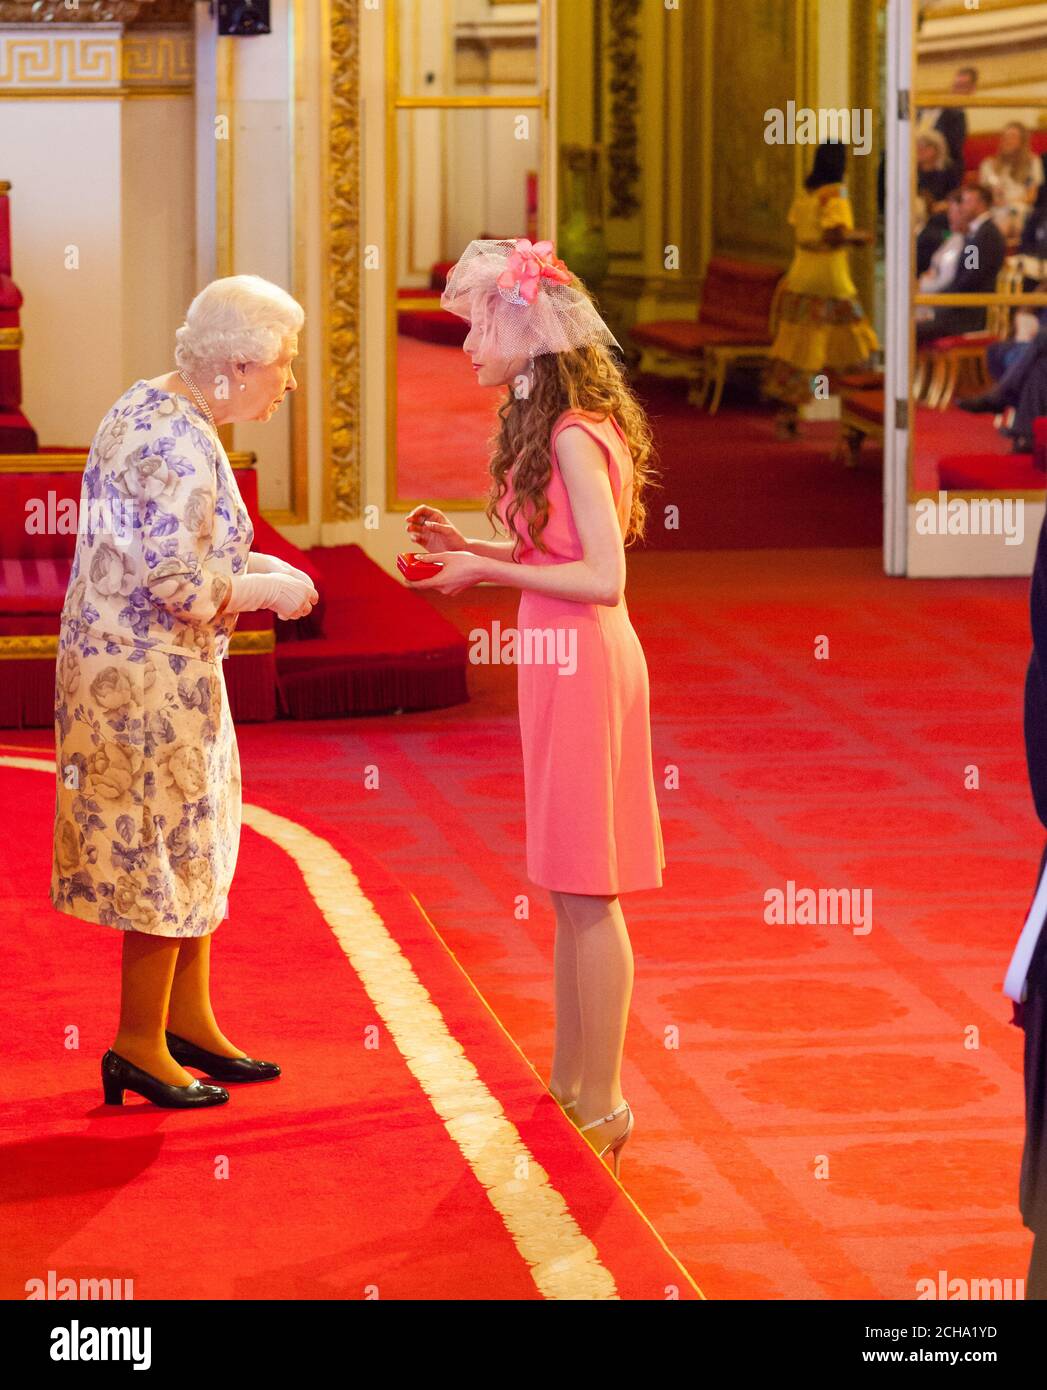 Ms. Kelly Lovell from Canada receives a medal from Queen Elizabeth II during the Queen's Young Leaders Awards 2016 at Buckingham Palace, London. PRESS ASSOCIATION Photo. Picture date: Thursday June 23, 2016. Photo credit should read: Dominic Lipinski/PA Wire Stock Photo